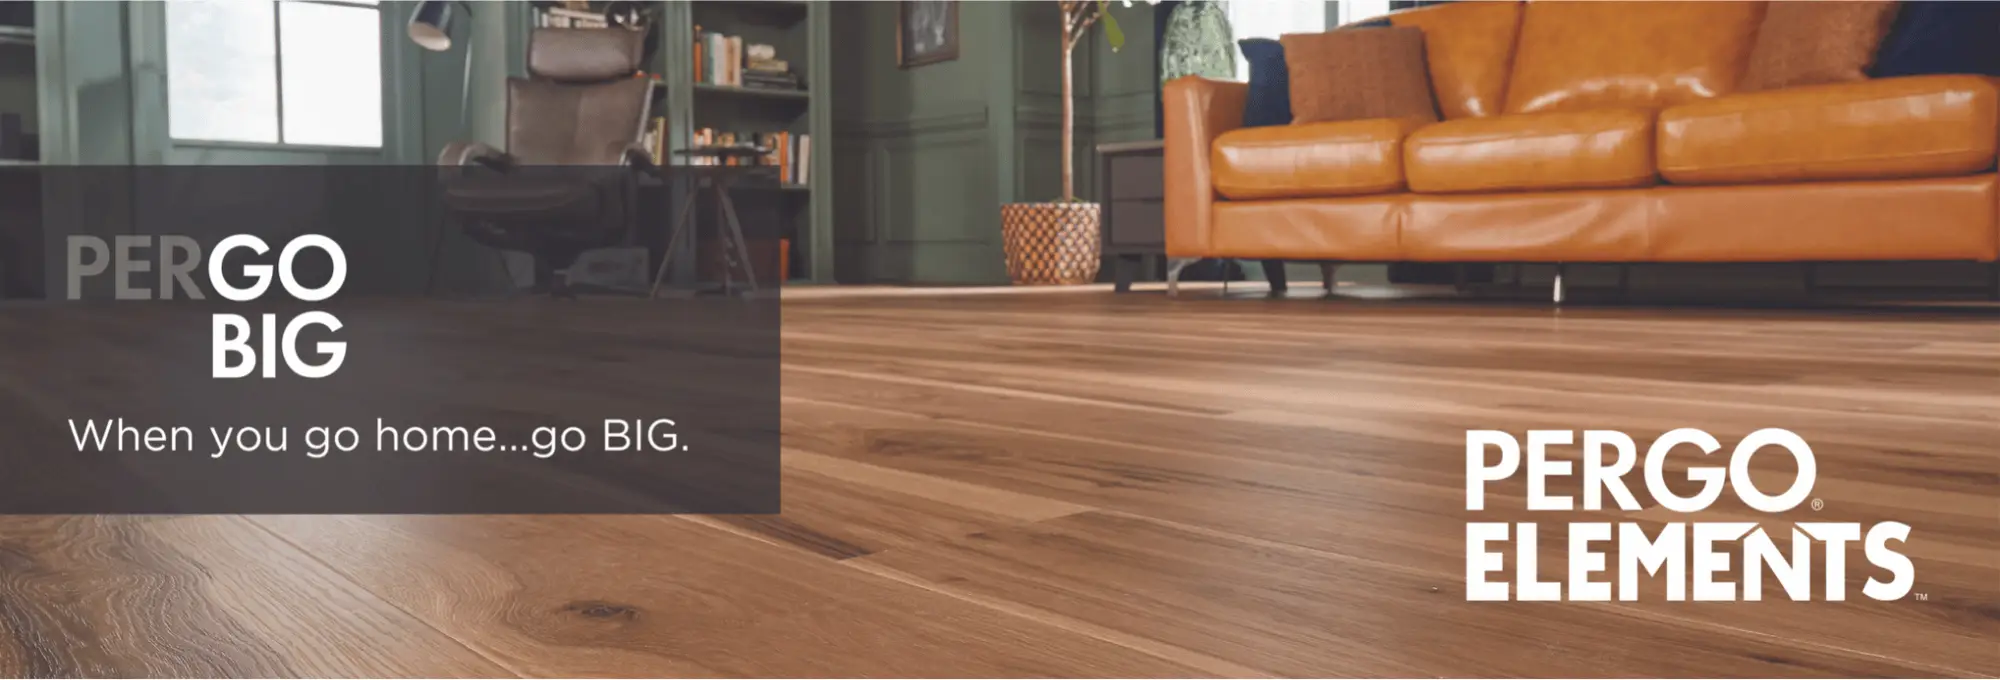 Explore Pergo flooring products from Absolute Floor Covering in Grand Rapids, MI